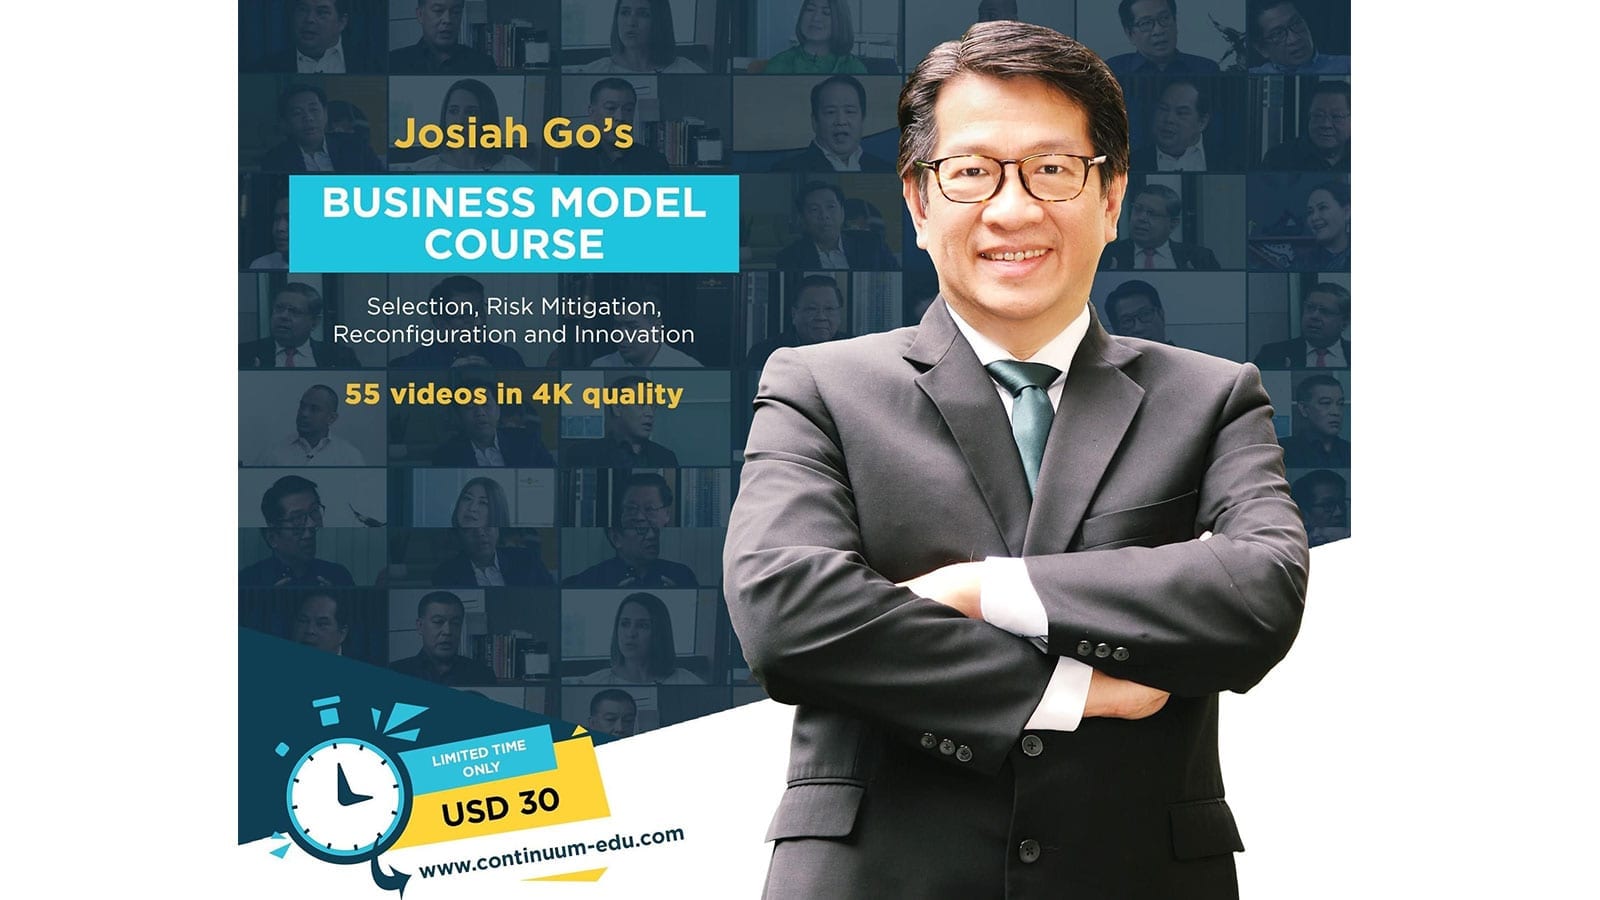 Business Model Video Course Launched